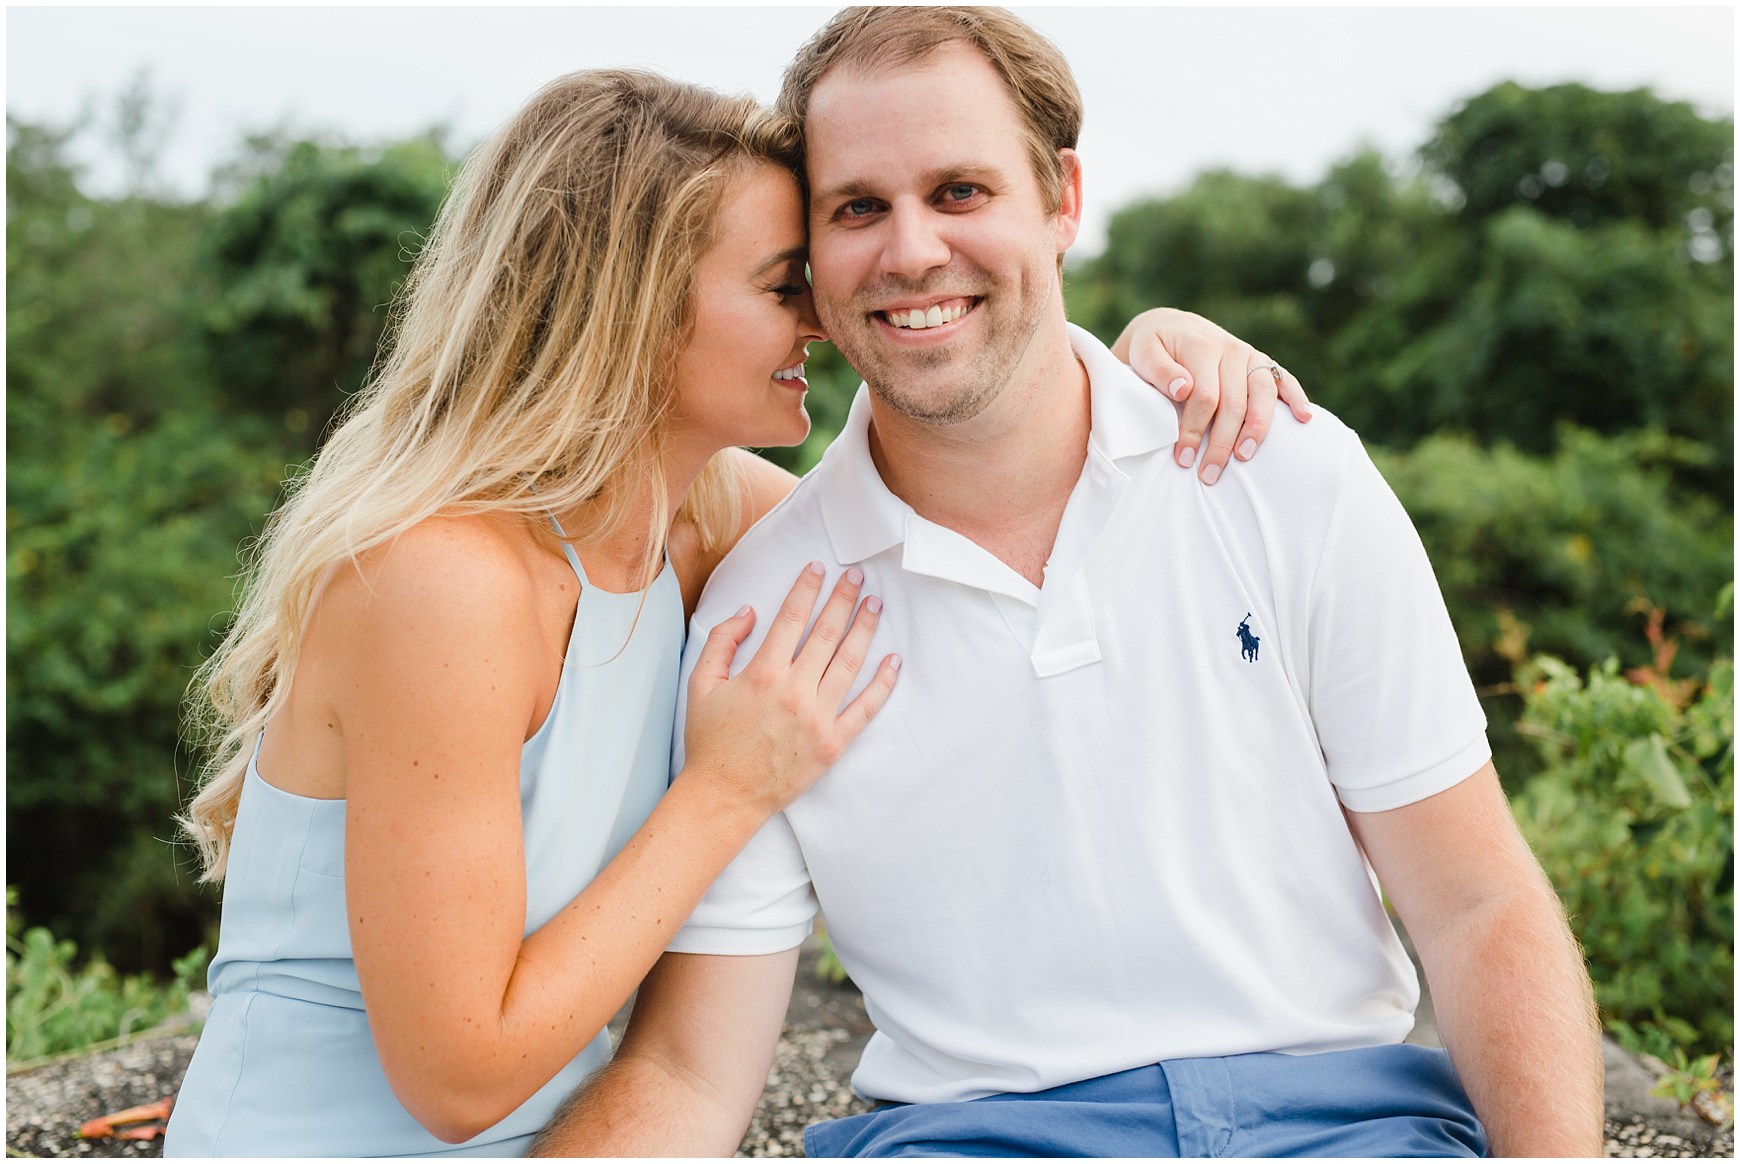 Engagement session at Fort Pickens on Pensacola Beach, FL